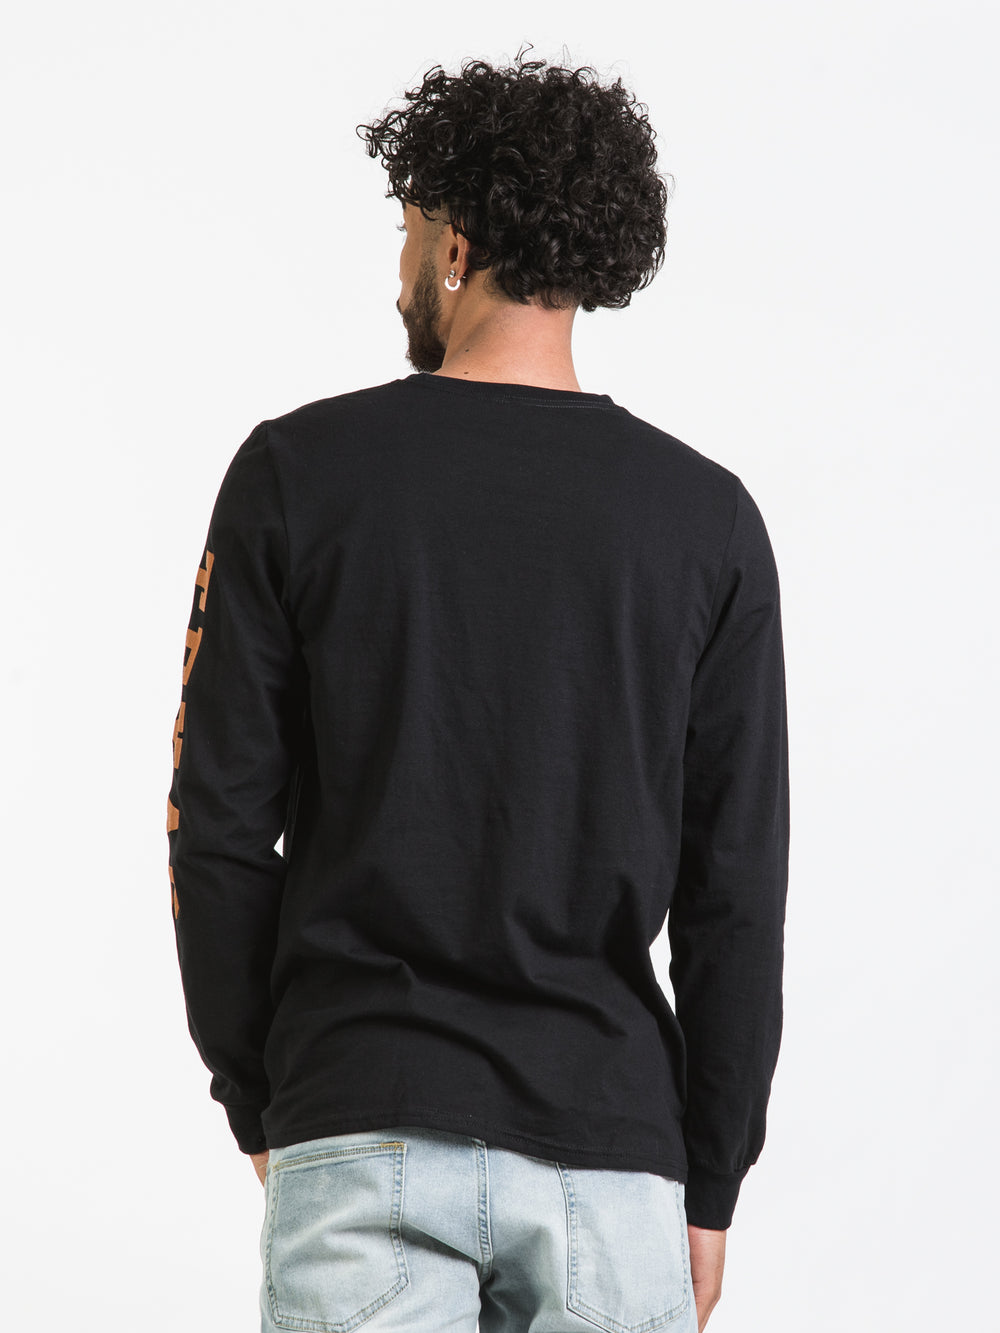 RUSSELL TEXAS STATE LONG SLEEVE TEE - CLEARANCE